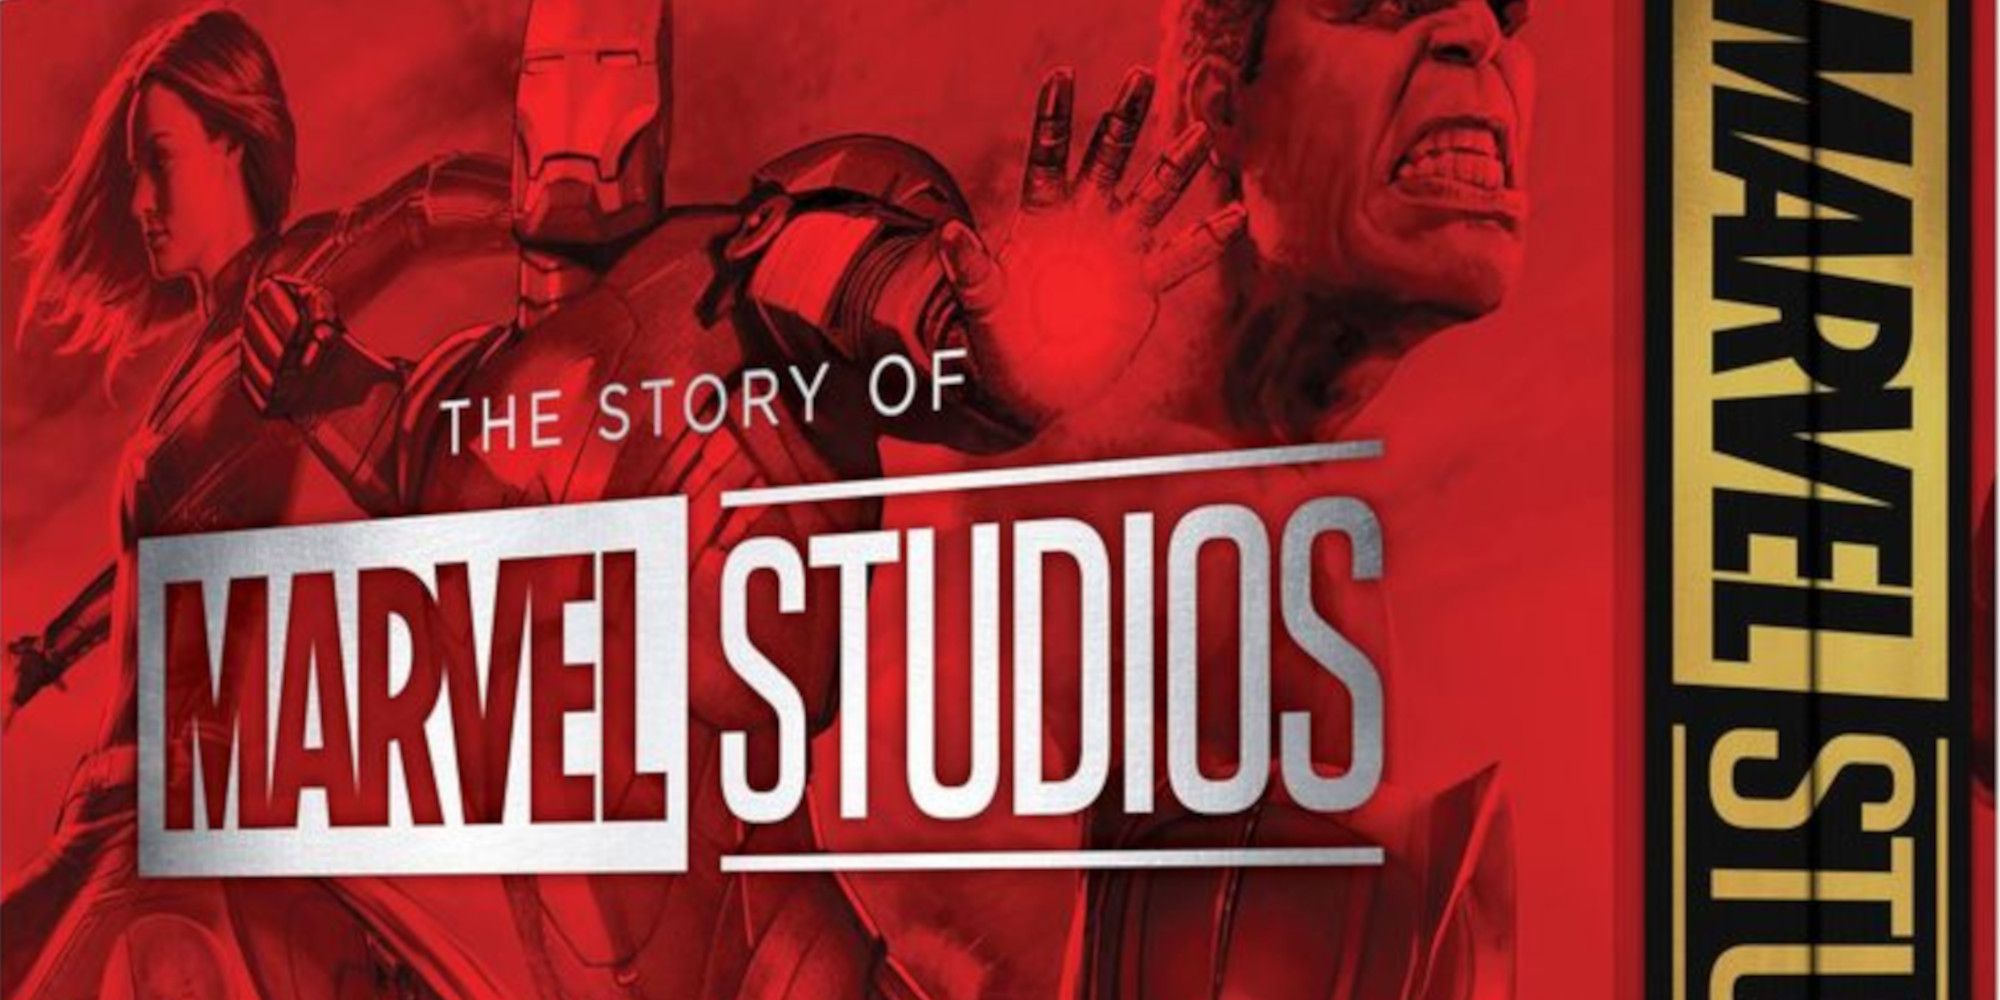 Story of Marvel Studios book cover